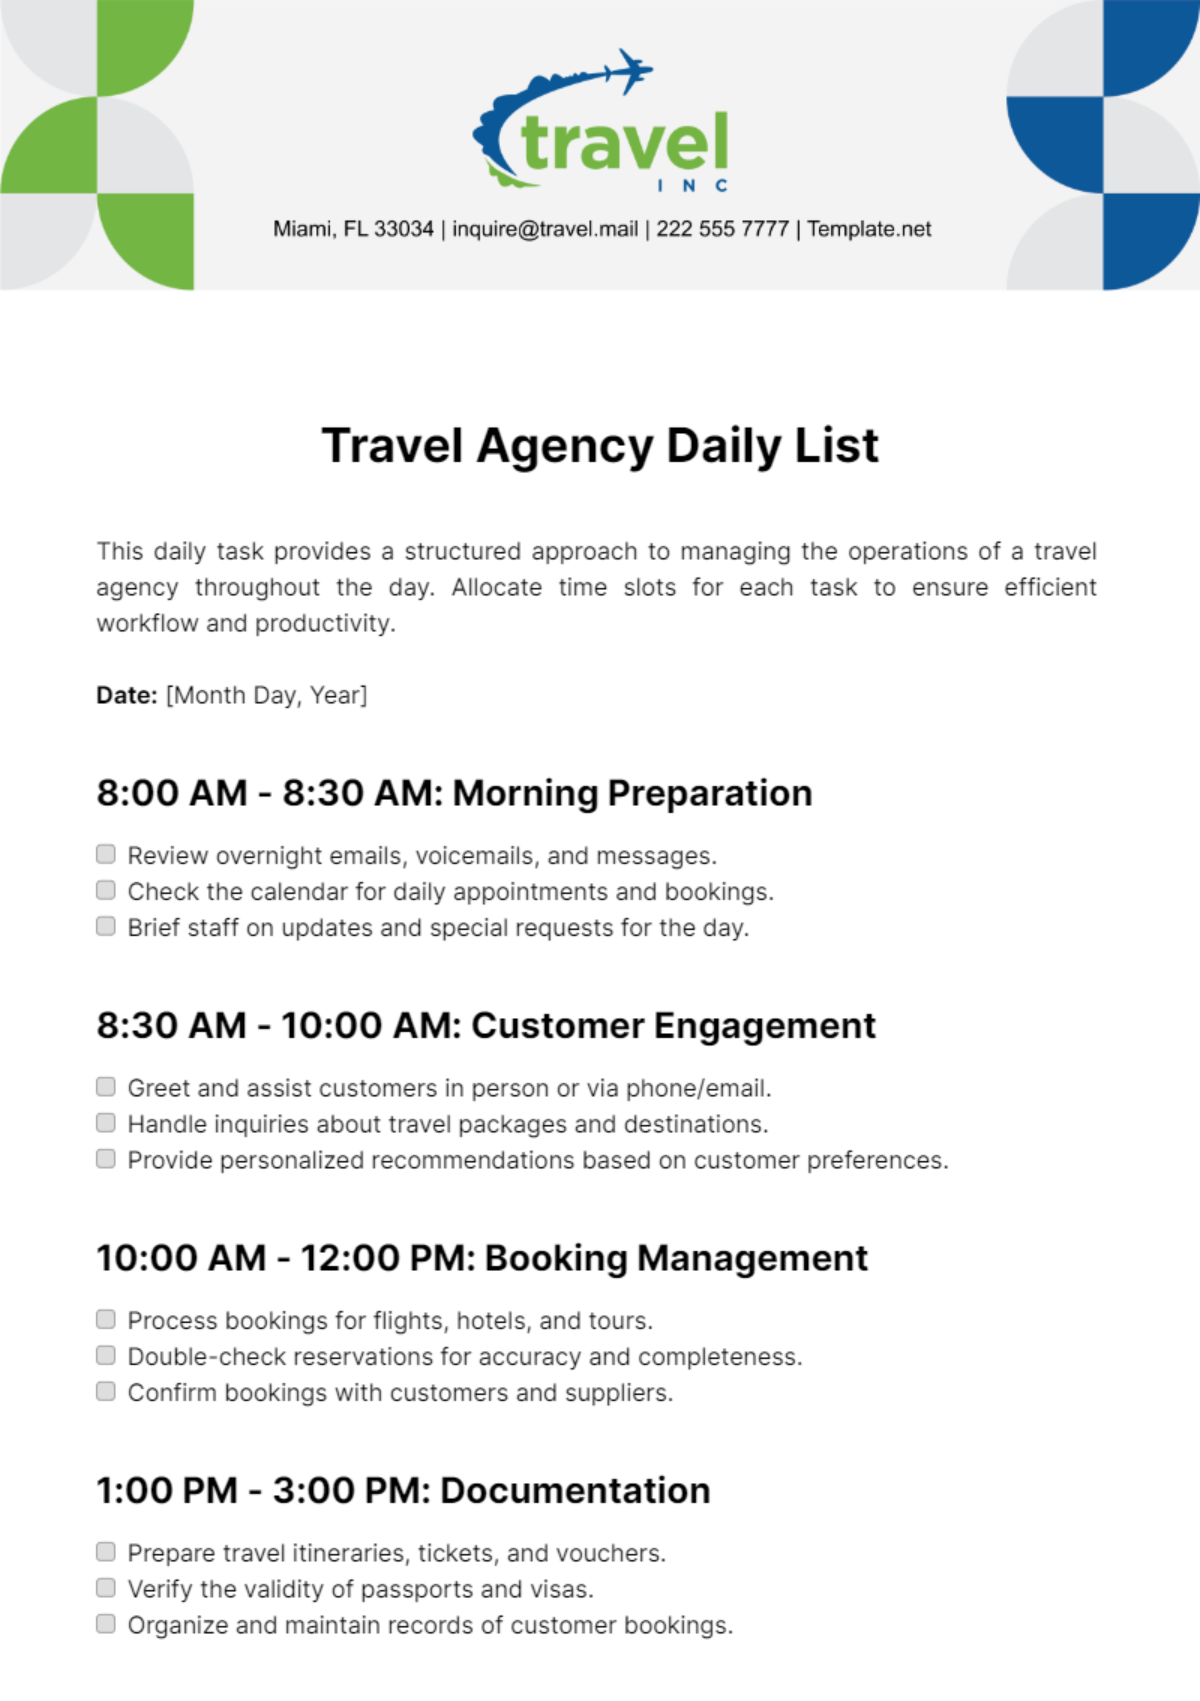 Free Travel Agency Daily List Template